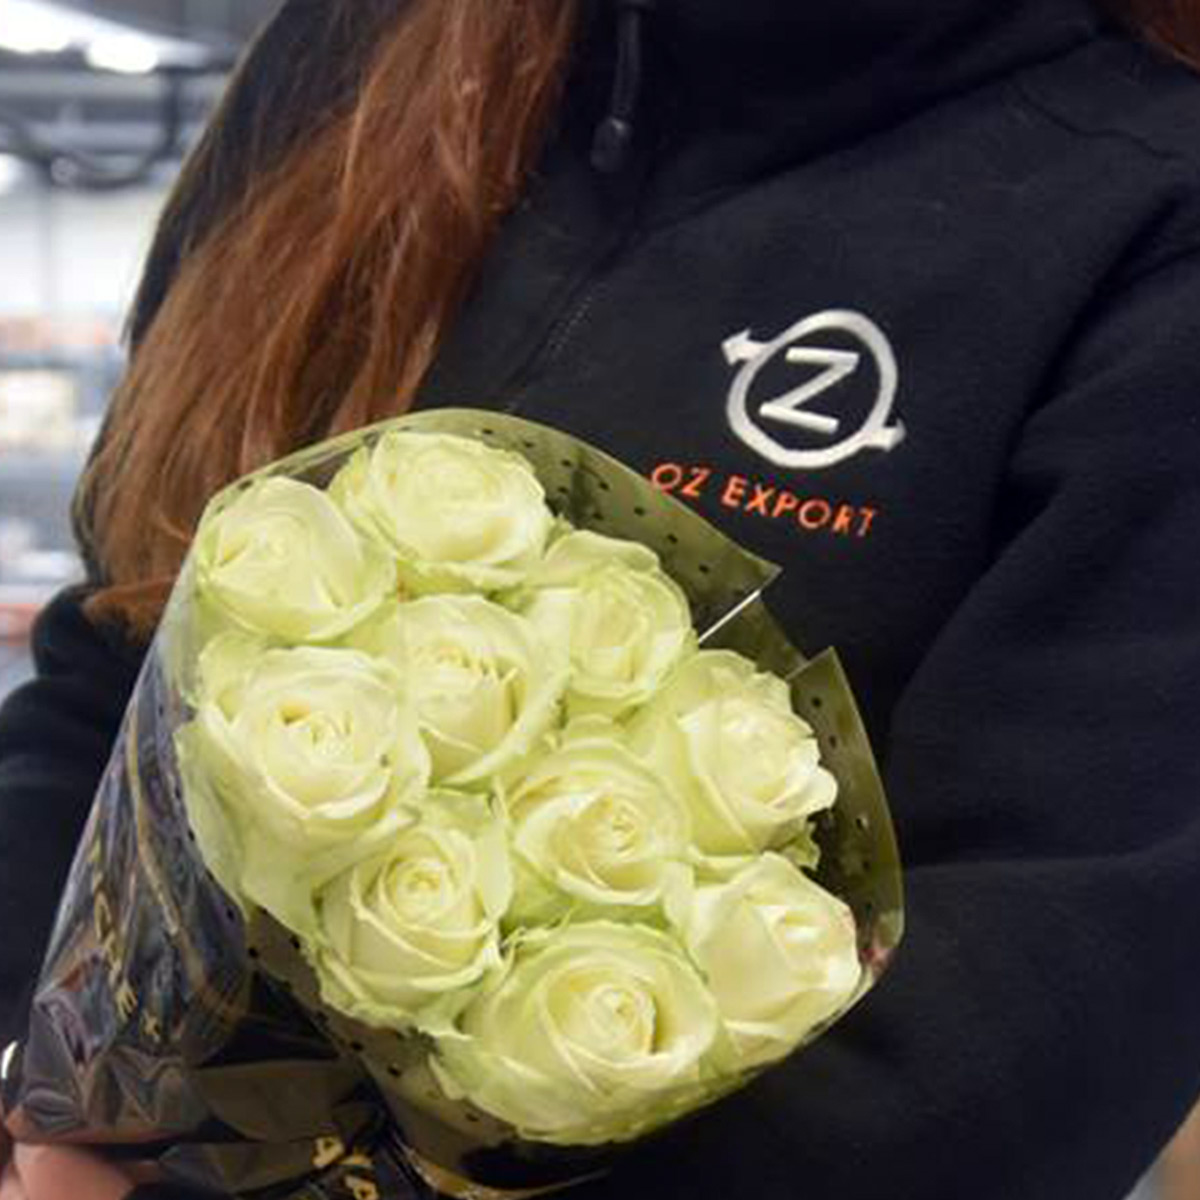 the-queen-of-roses-at-oz-export-featured